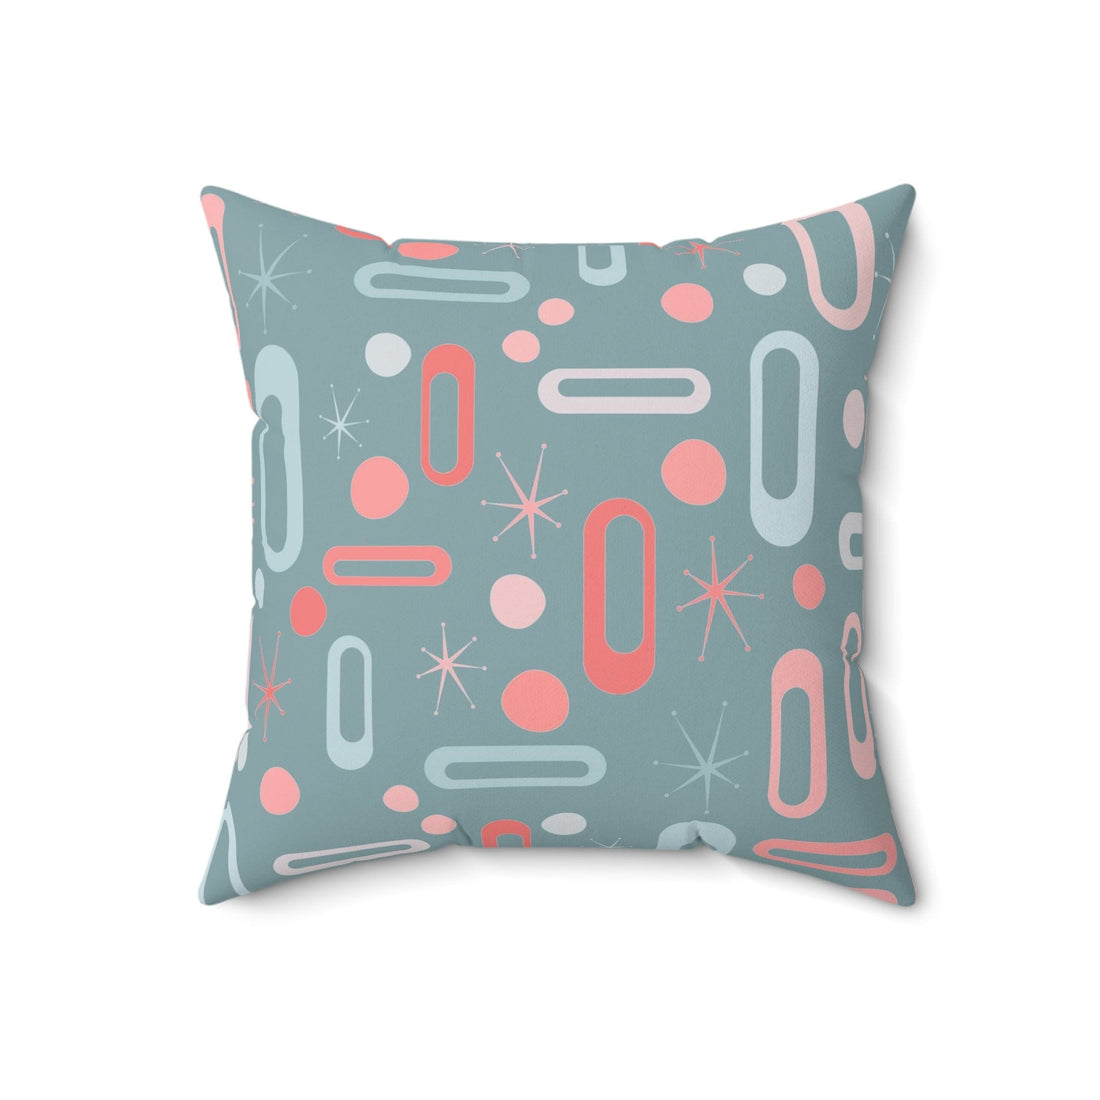 Mid Century Modern Pillow, Ice Blue, Pink, Coral, Geometric Designs, Atomic Starburst MCM Retro Home Decor Pillow And Insert Home Decor 18&quot; × 18&quot;